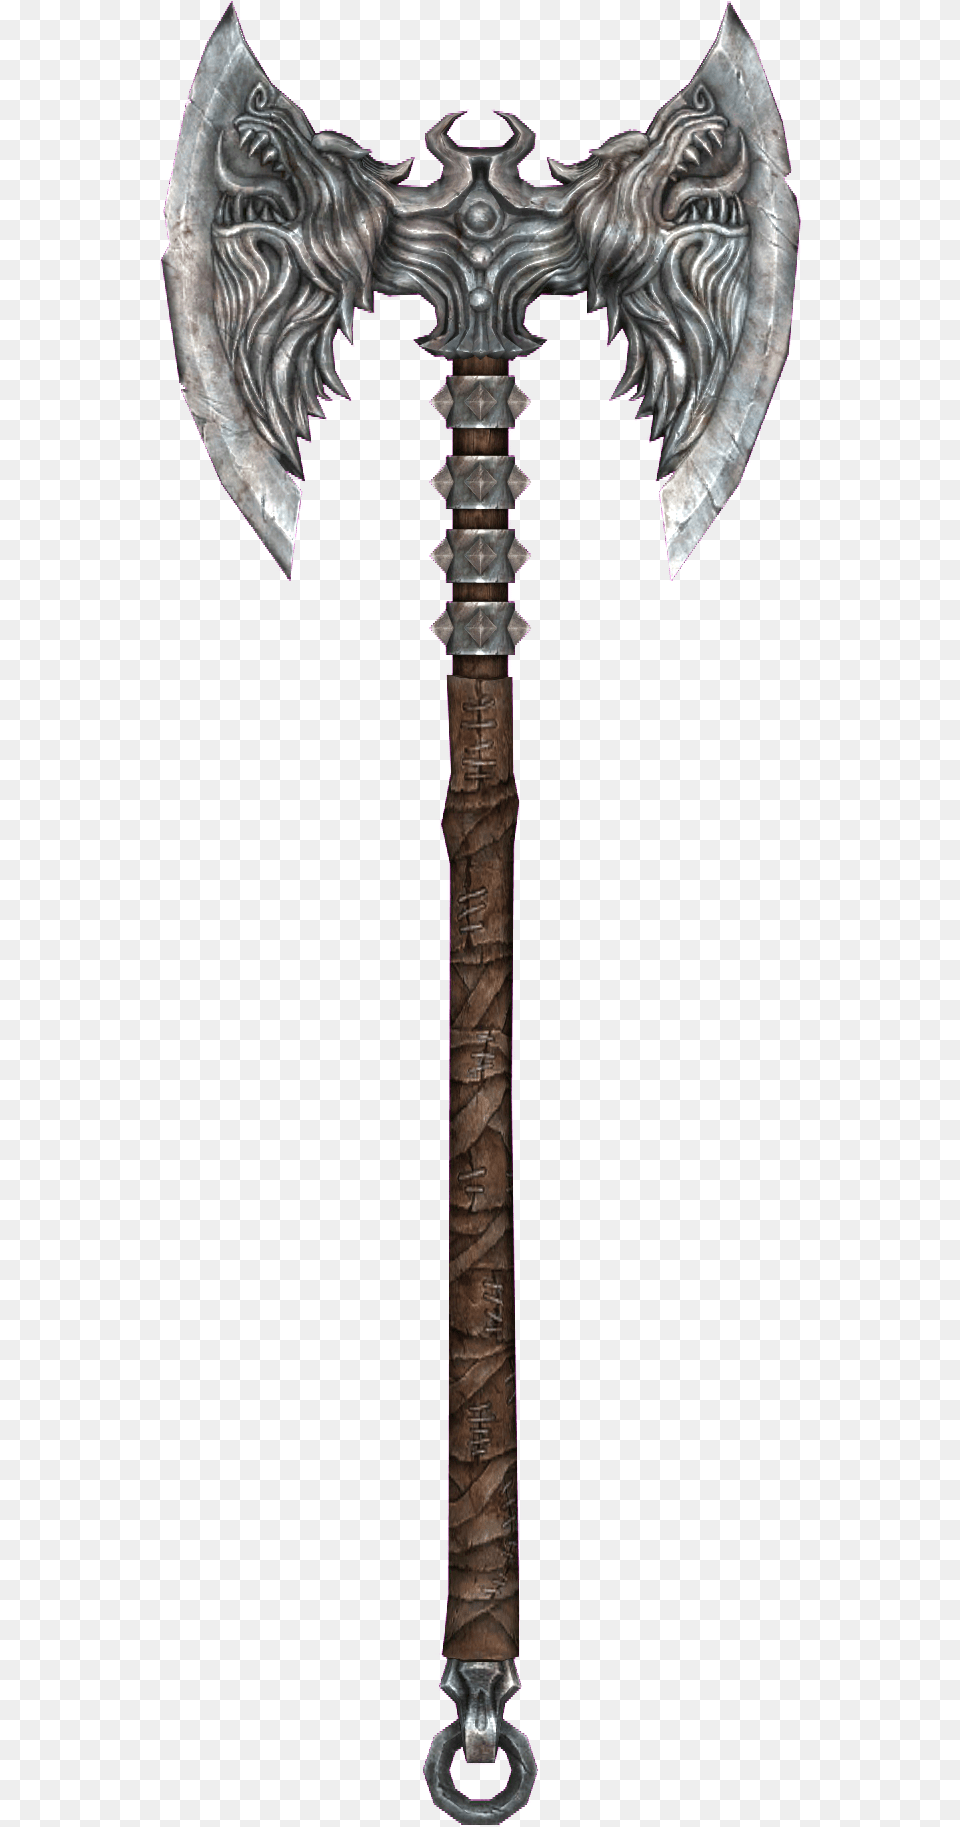 Http Images3 Wikia Nocookie Net Ruefulaxe, Weapon, Axe, Device, Tool Png